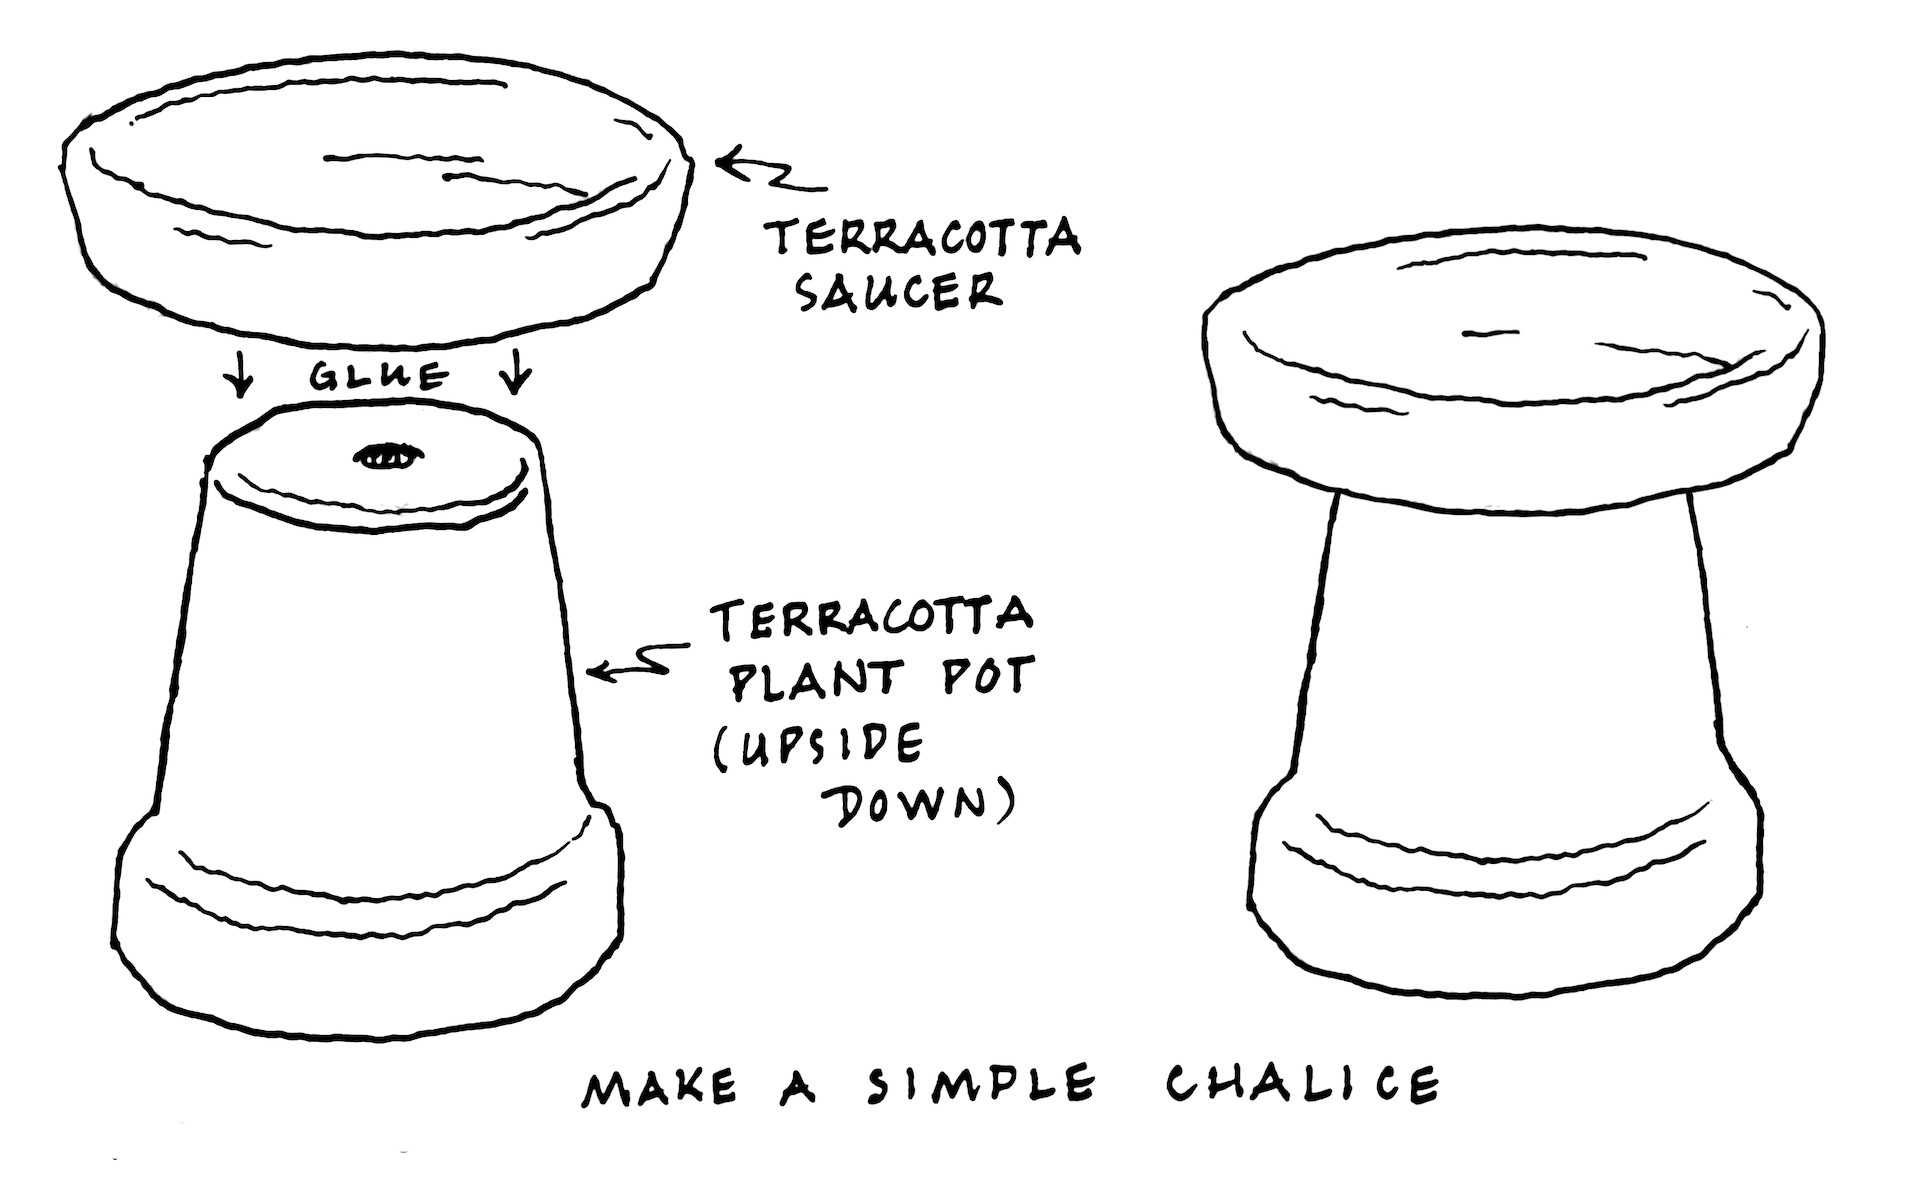 Diagram of how to contruct a chalice with a terracotta pot and terracotta saucer